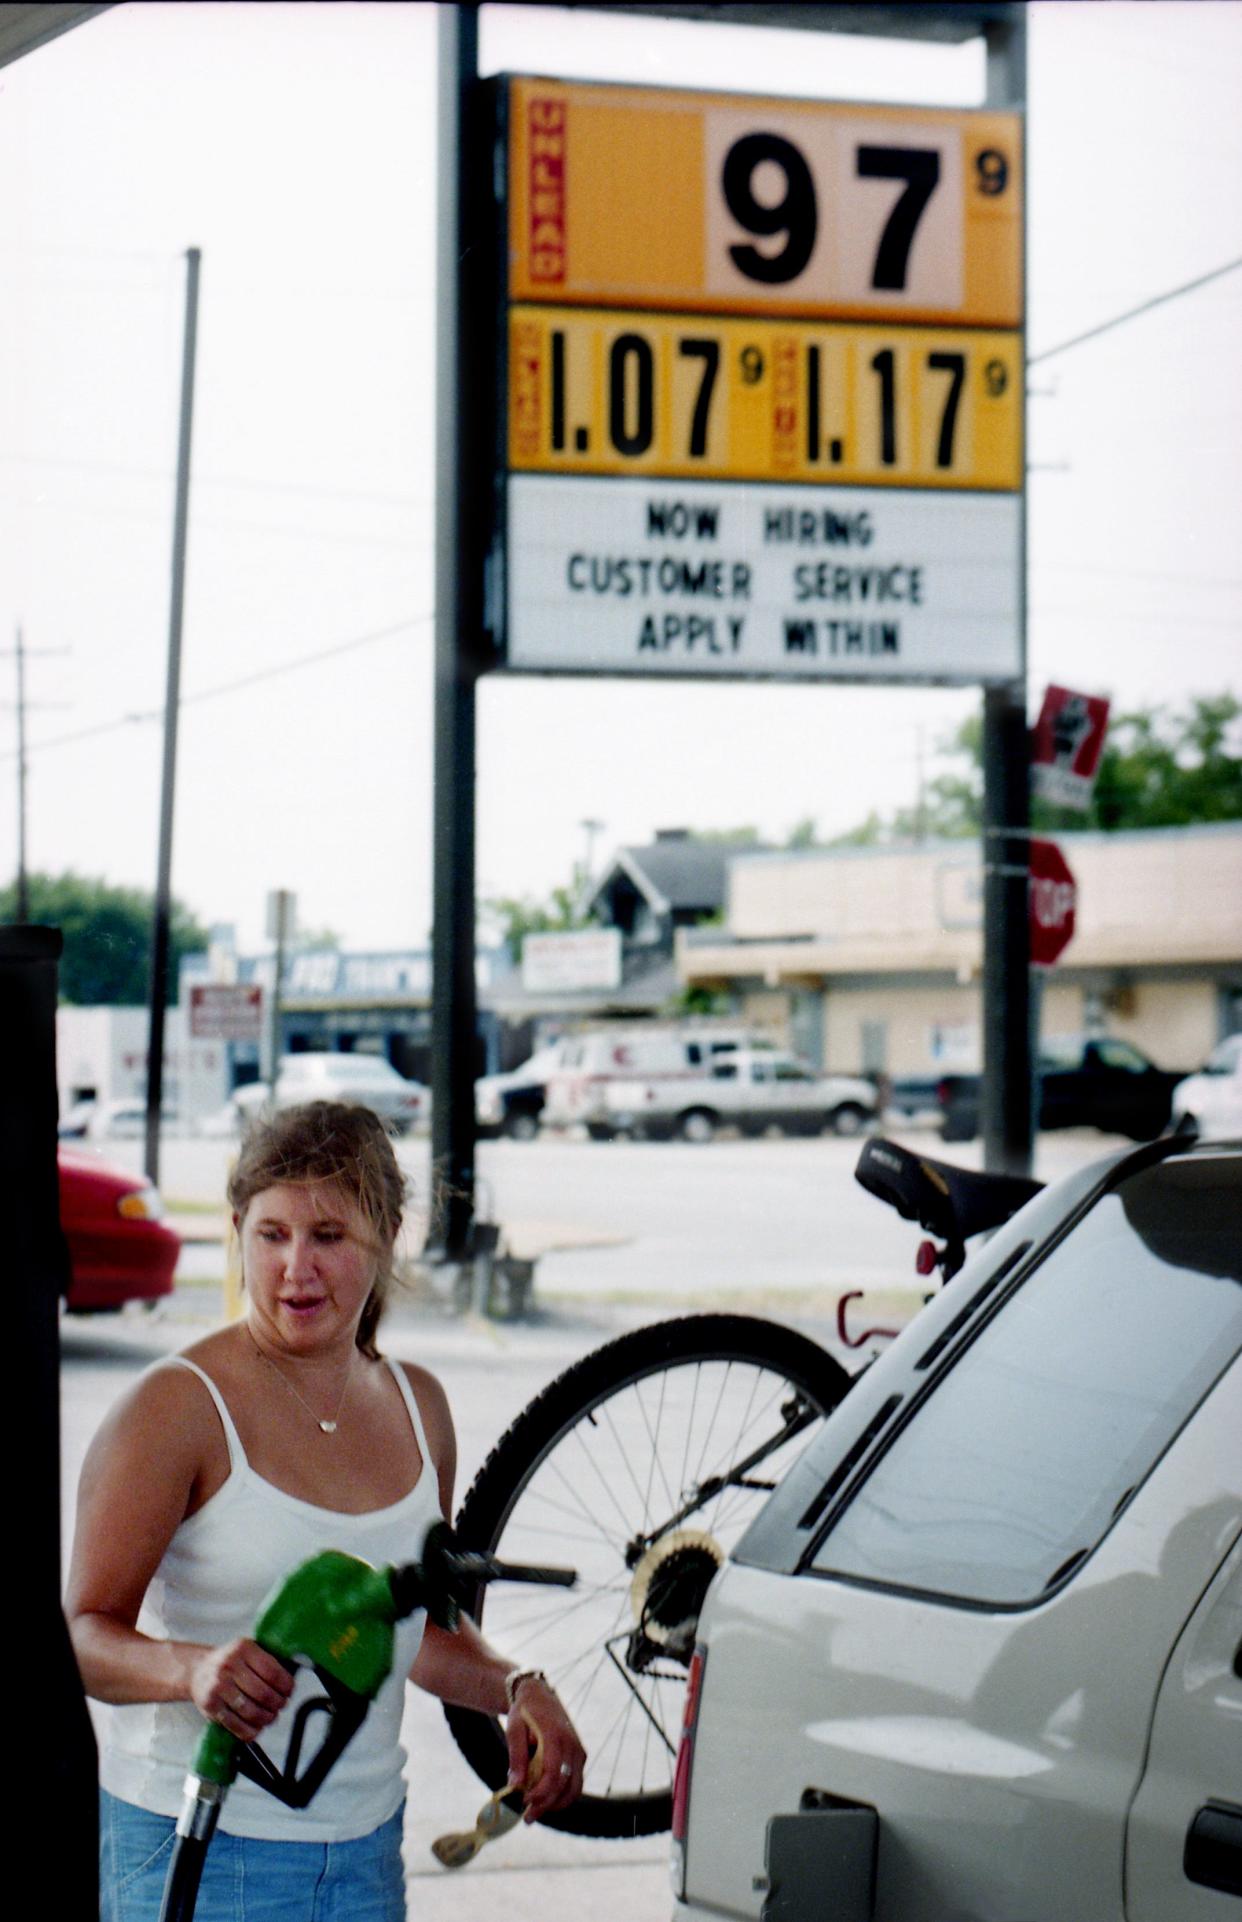 Flashback: Jennifer Larson, 21, of Boulder, Colo., is finishing up filling her car at the Mapco station on Charlotte Avenue in Nashville May 20, 1998. She is on her way to Wrightsville Beach, N.C., for a summer job. Record numbers of motorists are expected to drive to their upcoming Memorial Day vacations with the least expensive gasoline in a decade.